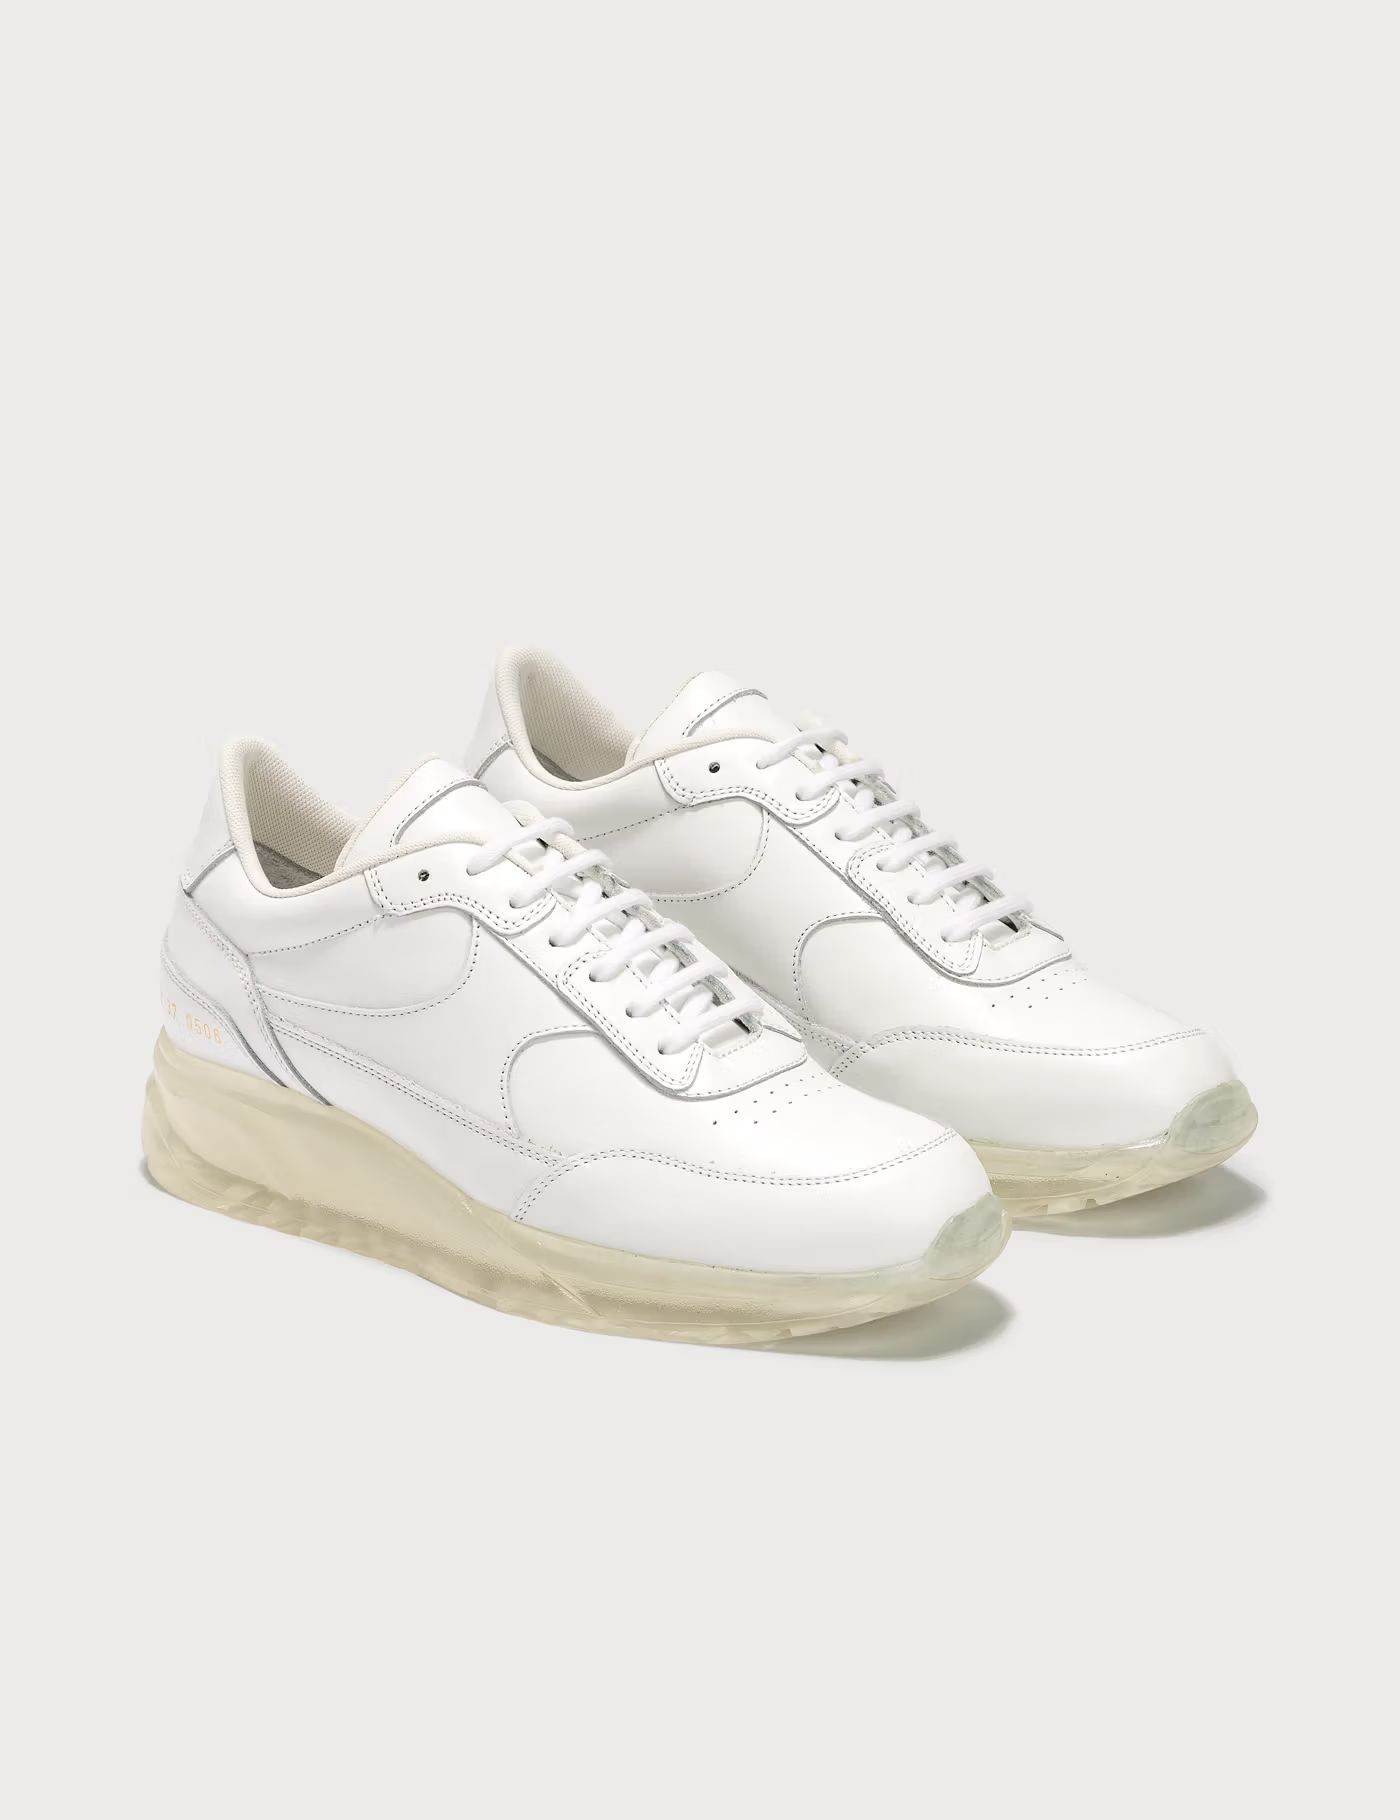 Common Projects Transparent Sole Pack Track Classic | Hypebeast